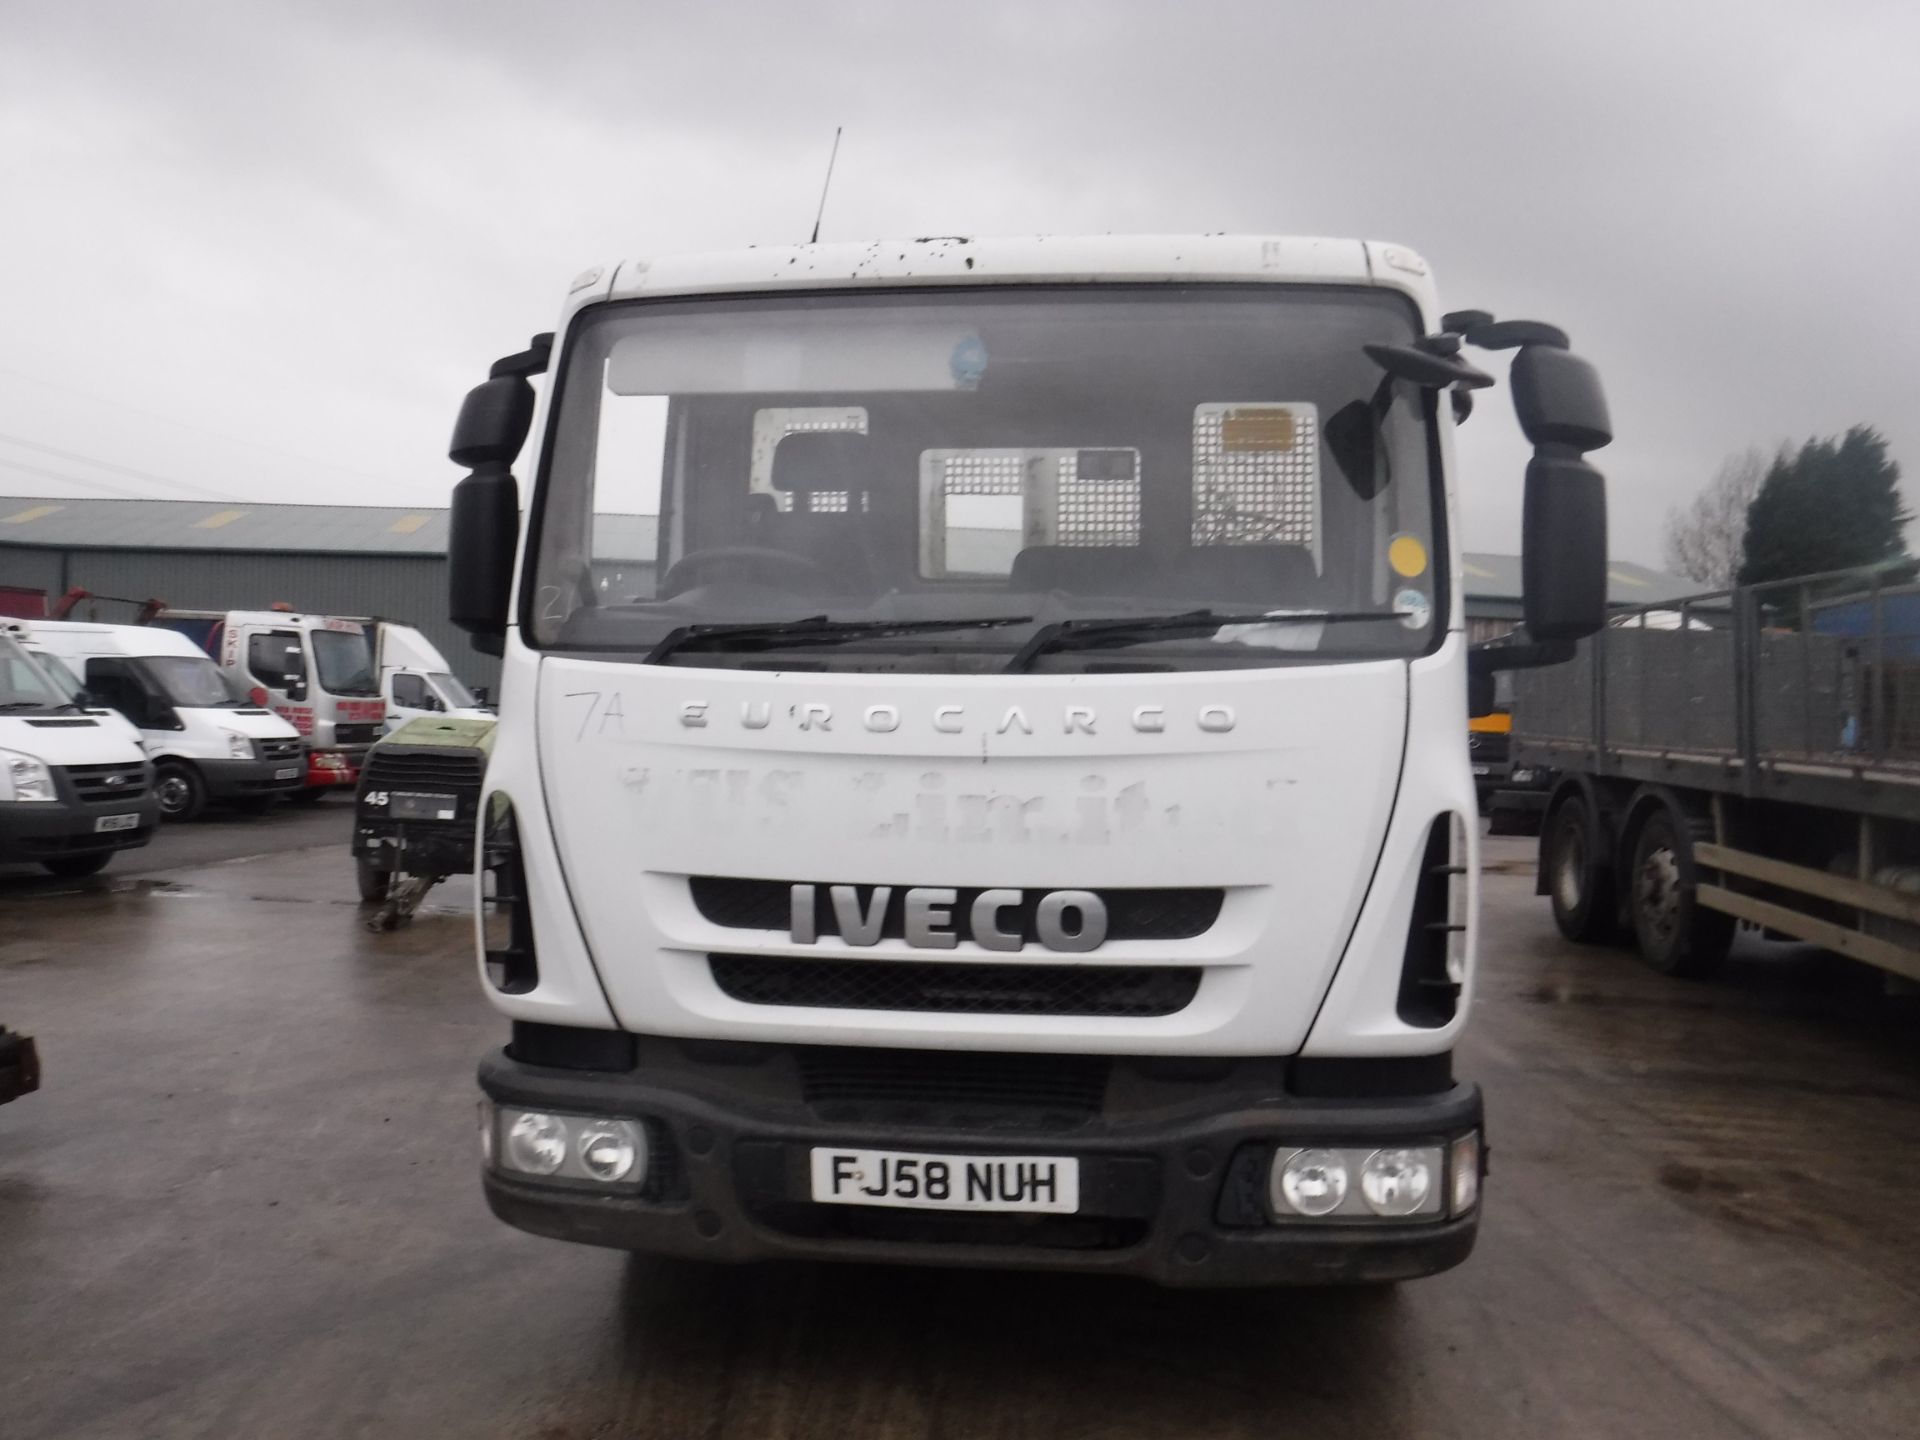 2008 iveco eurp cargo 75e16 303225km tipper towbar good runner v5 here 7500kg drive on a car - Image 2 of 5